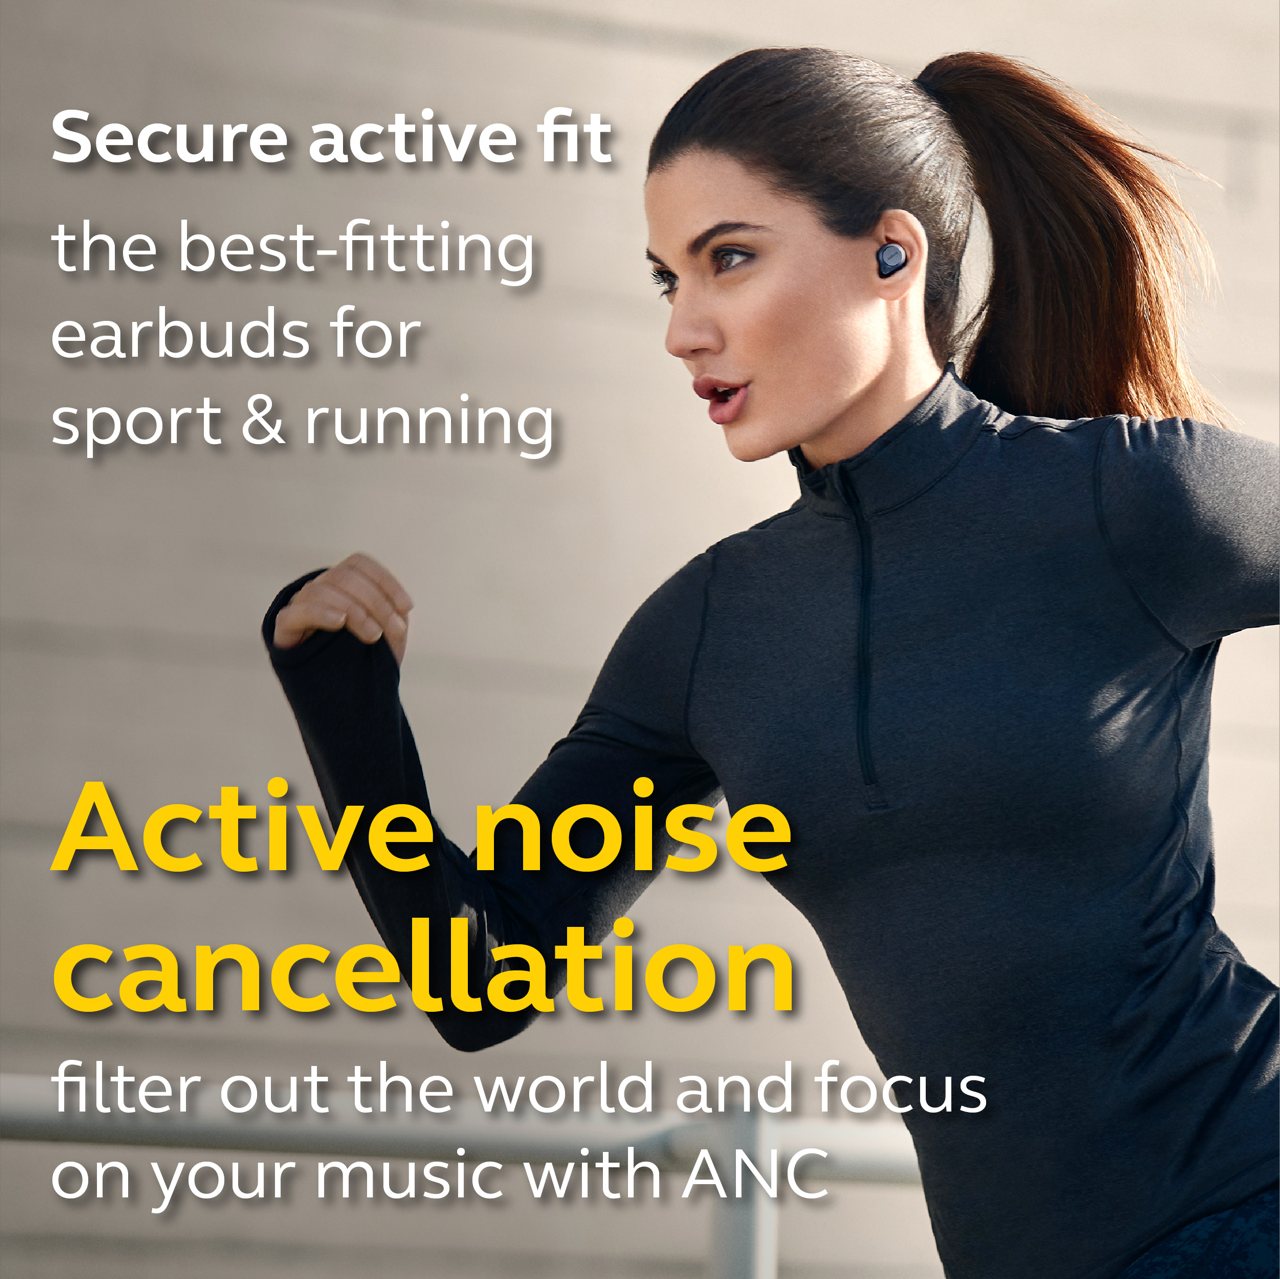 Jabra Elite Active 75t True Wireless Earbuds, Noise Cancelling, Navy - image 2 of 7